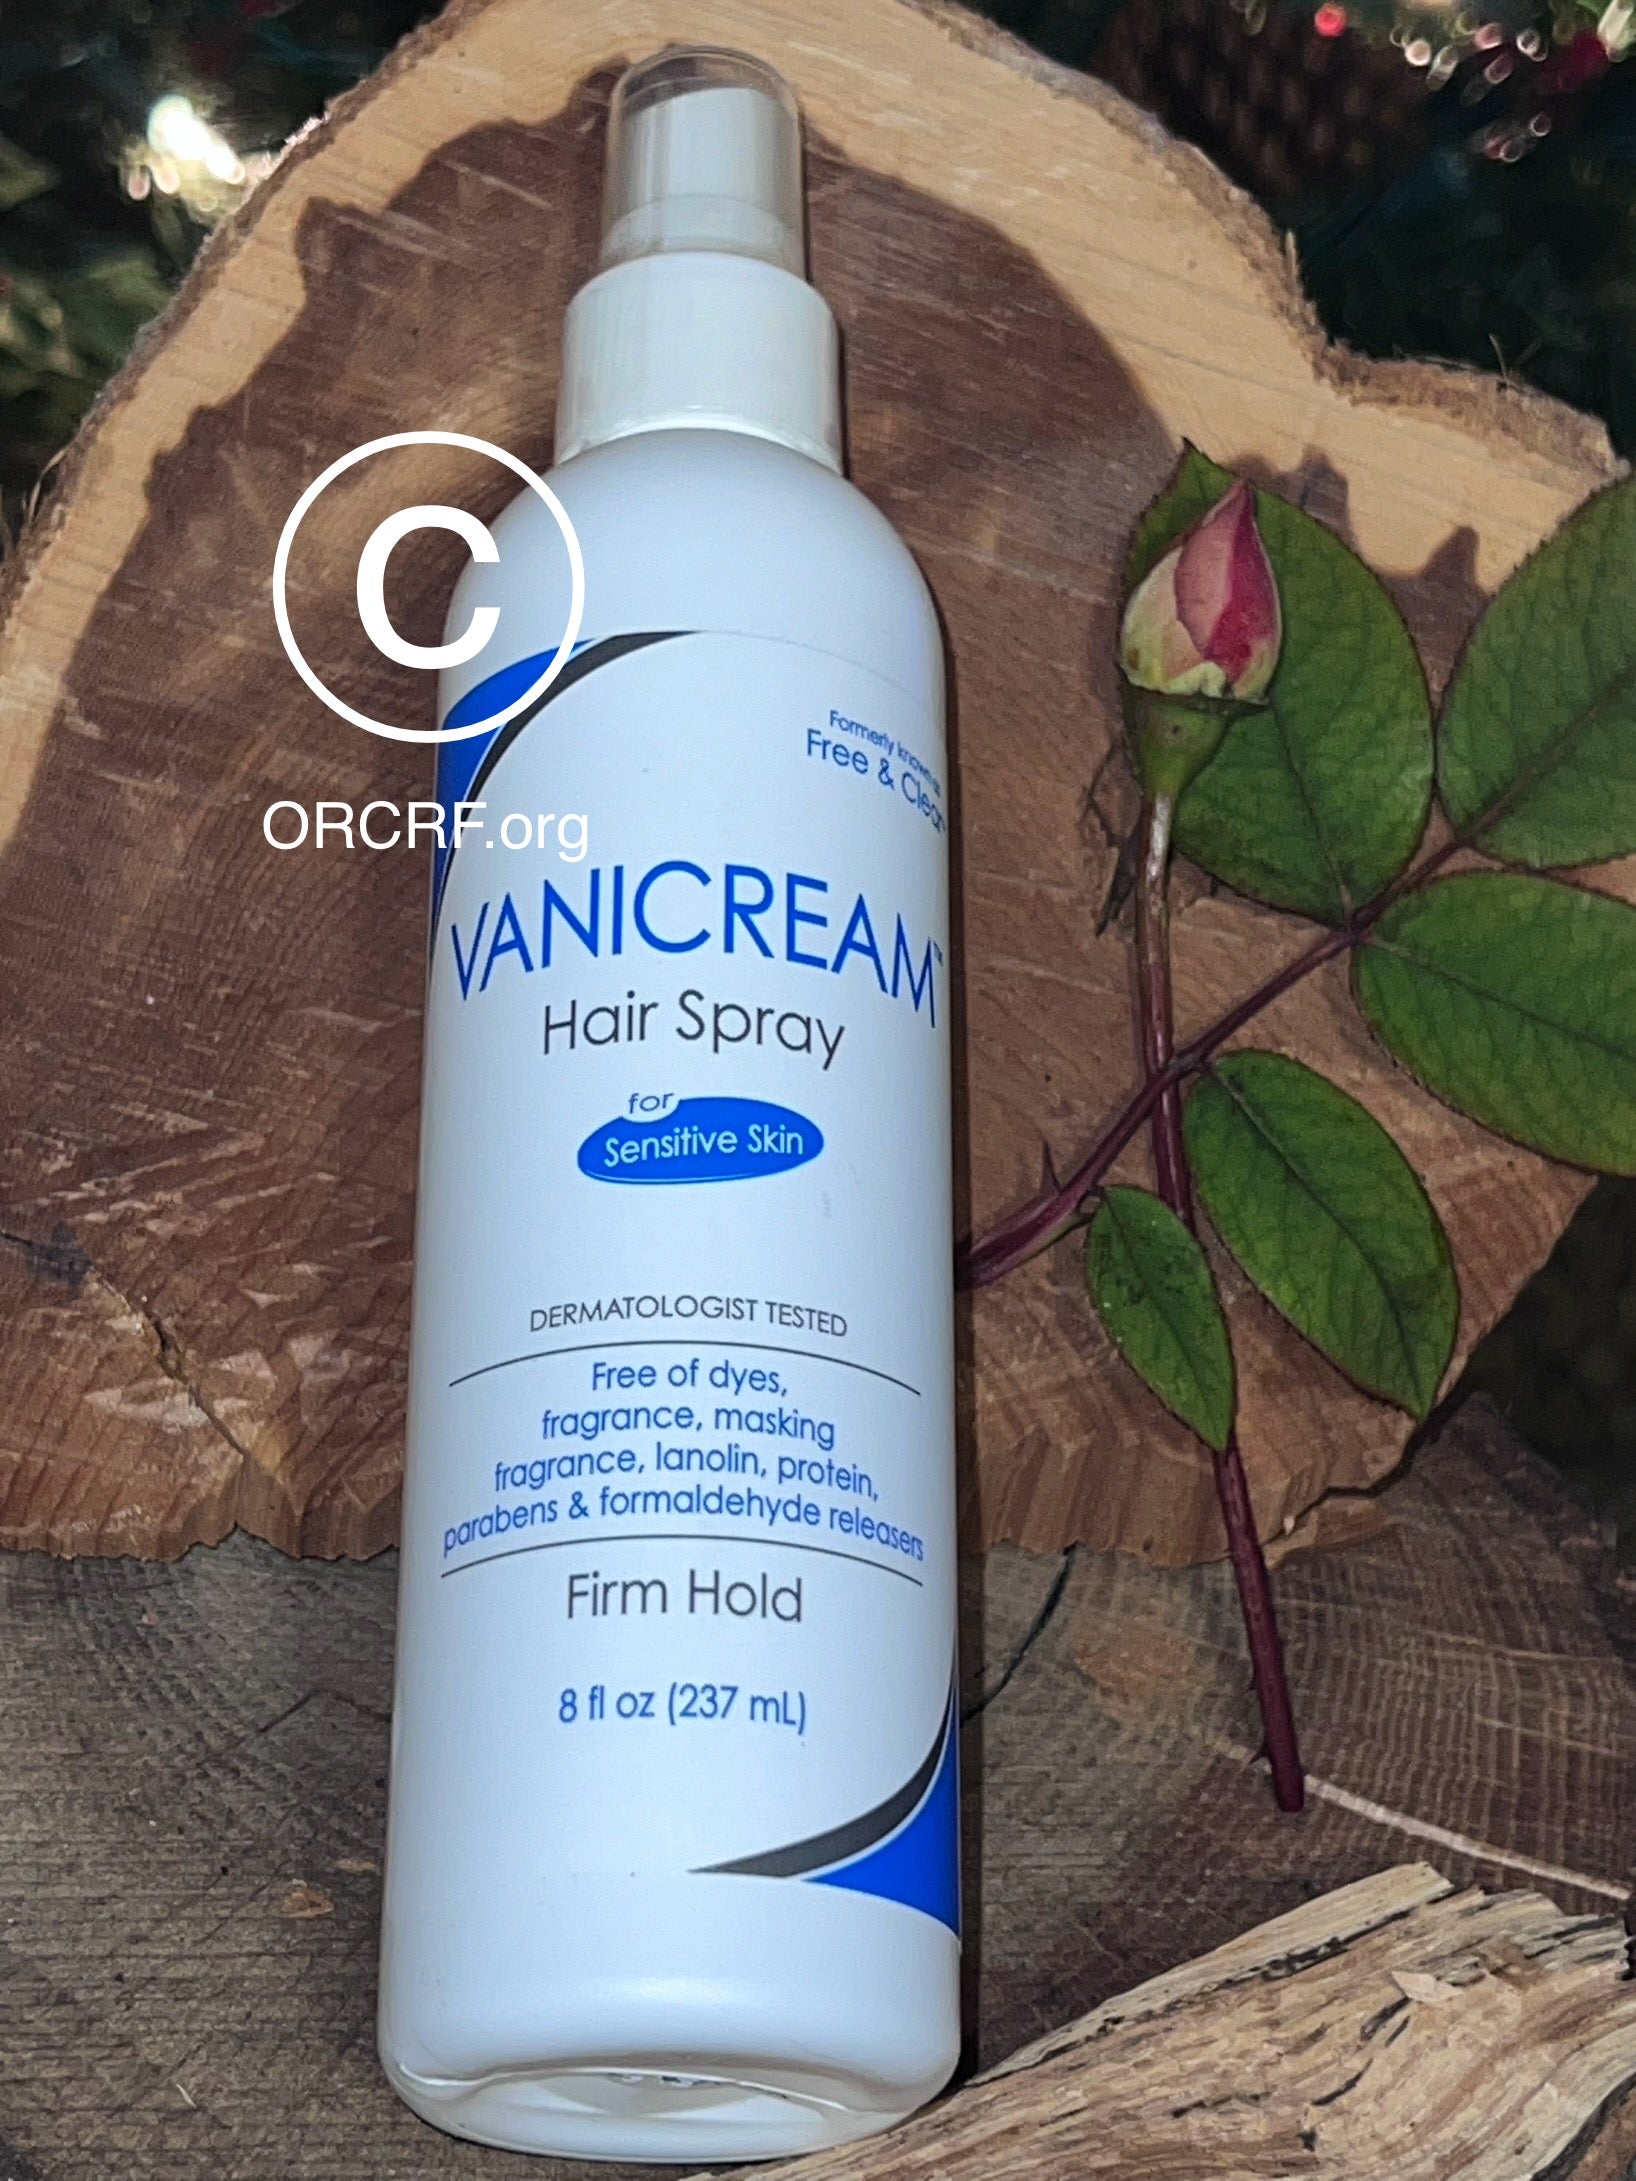 Vanicream HAIR STYLING SPRAY for SENSITIVE SKIN 8 fl oz 227g - Supporting ORCRF.org